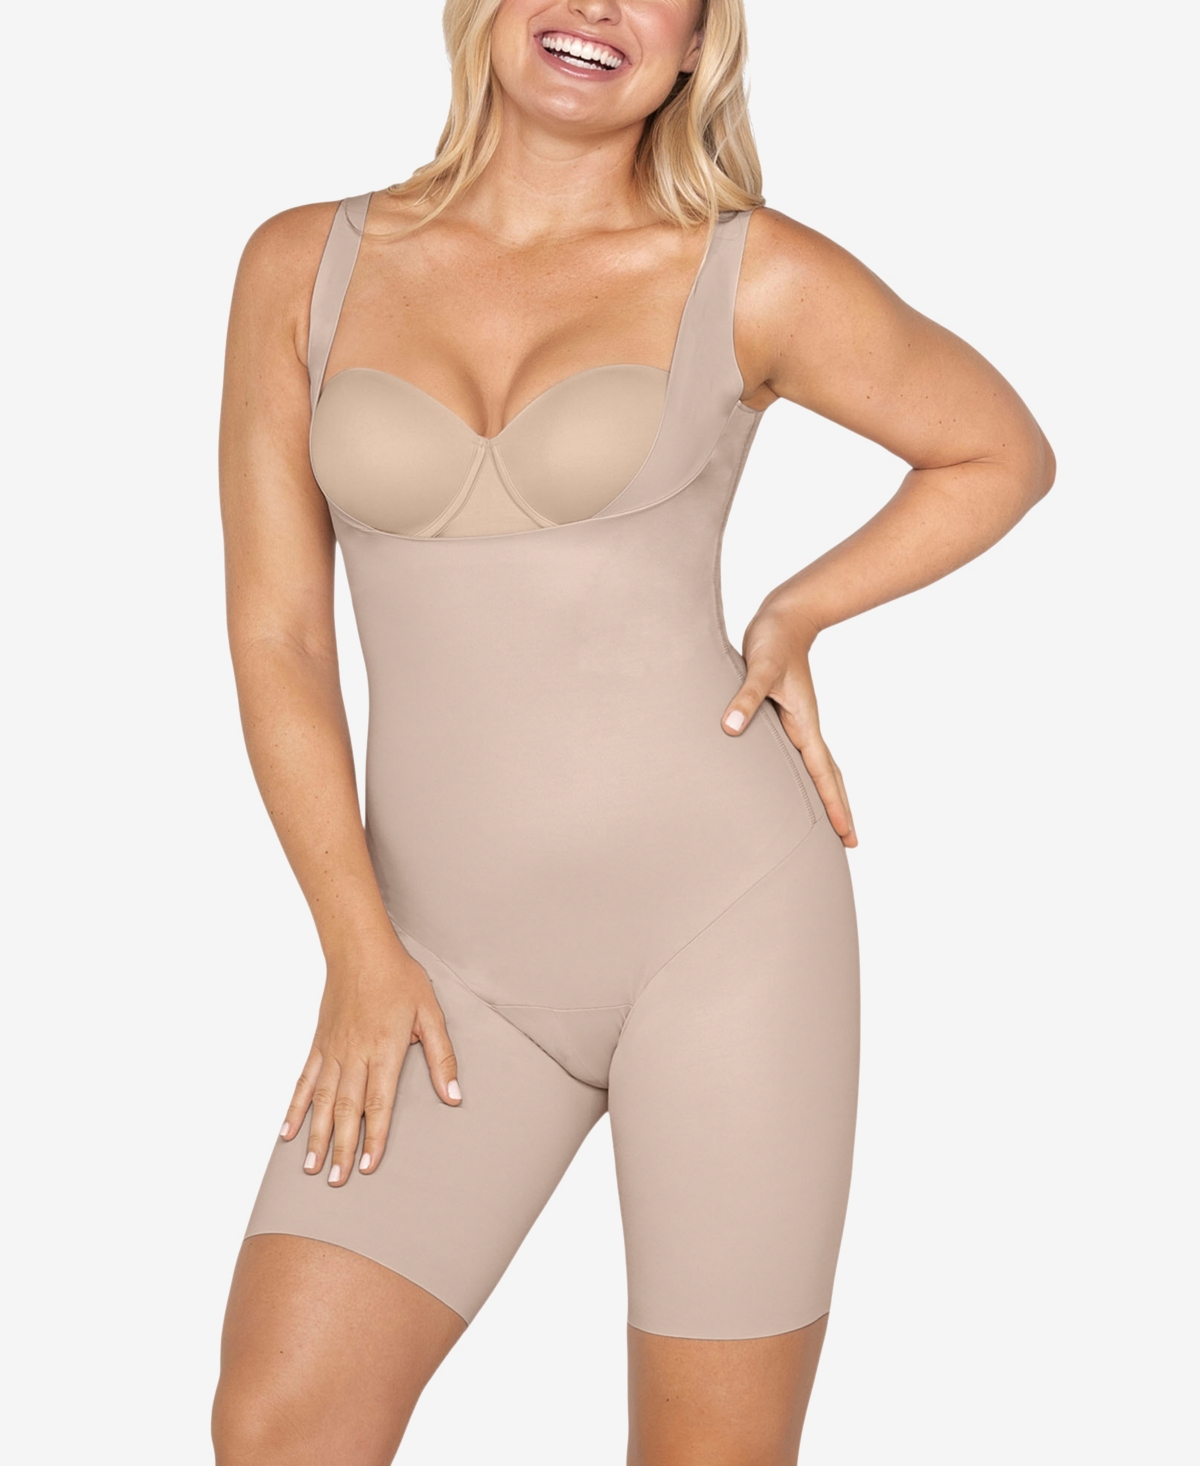 Leonisa Women's Undetectable Step-In Mid-Thigh Body Shaper